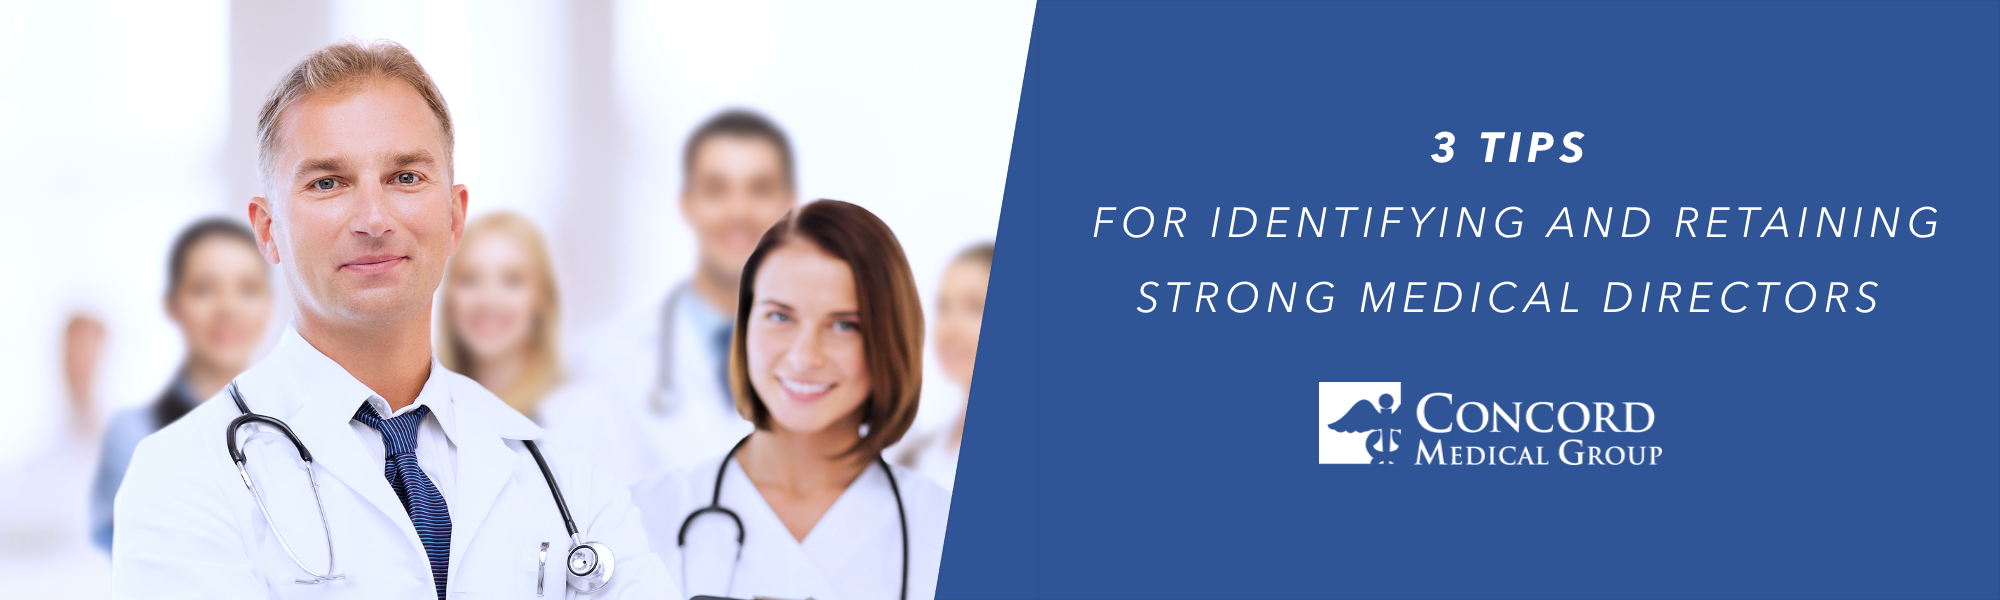 3 Tips for Identifying and Retaining Strong Medical Directors